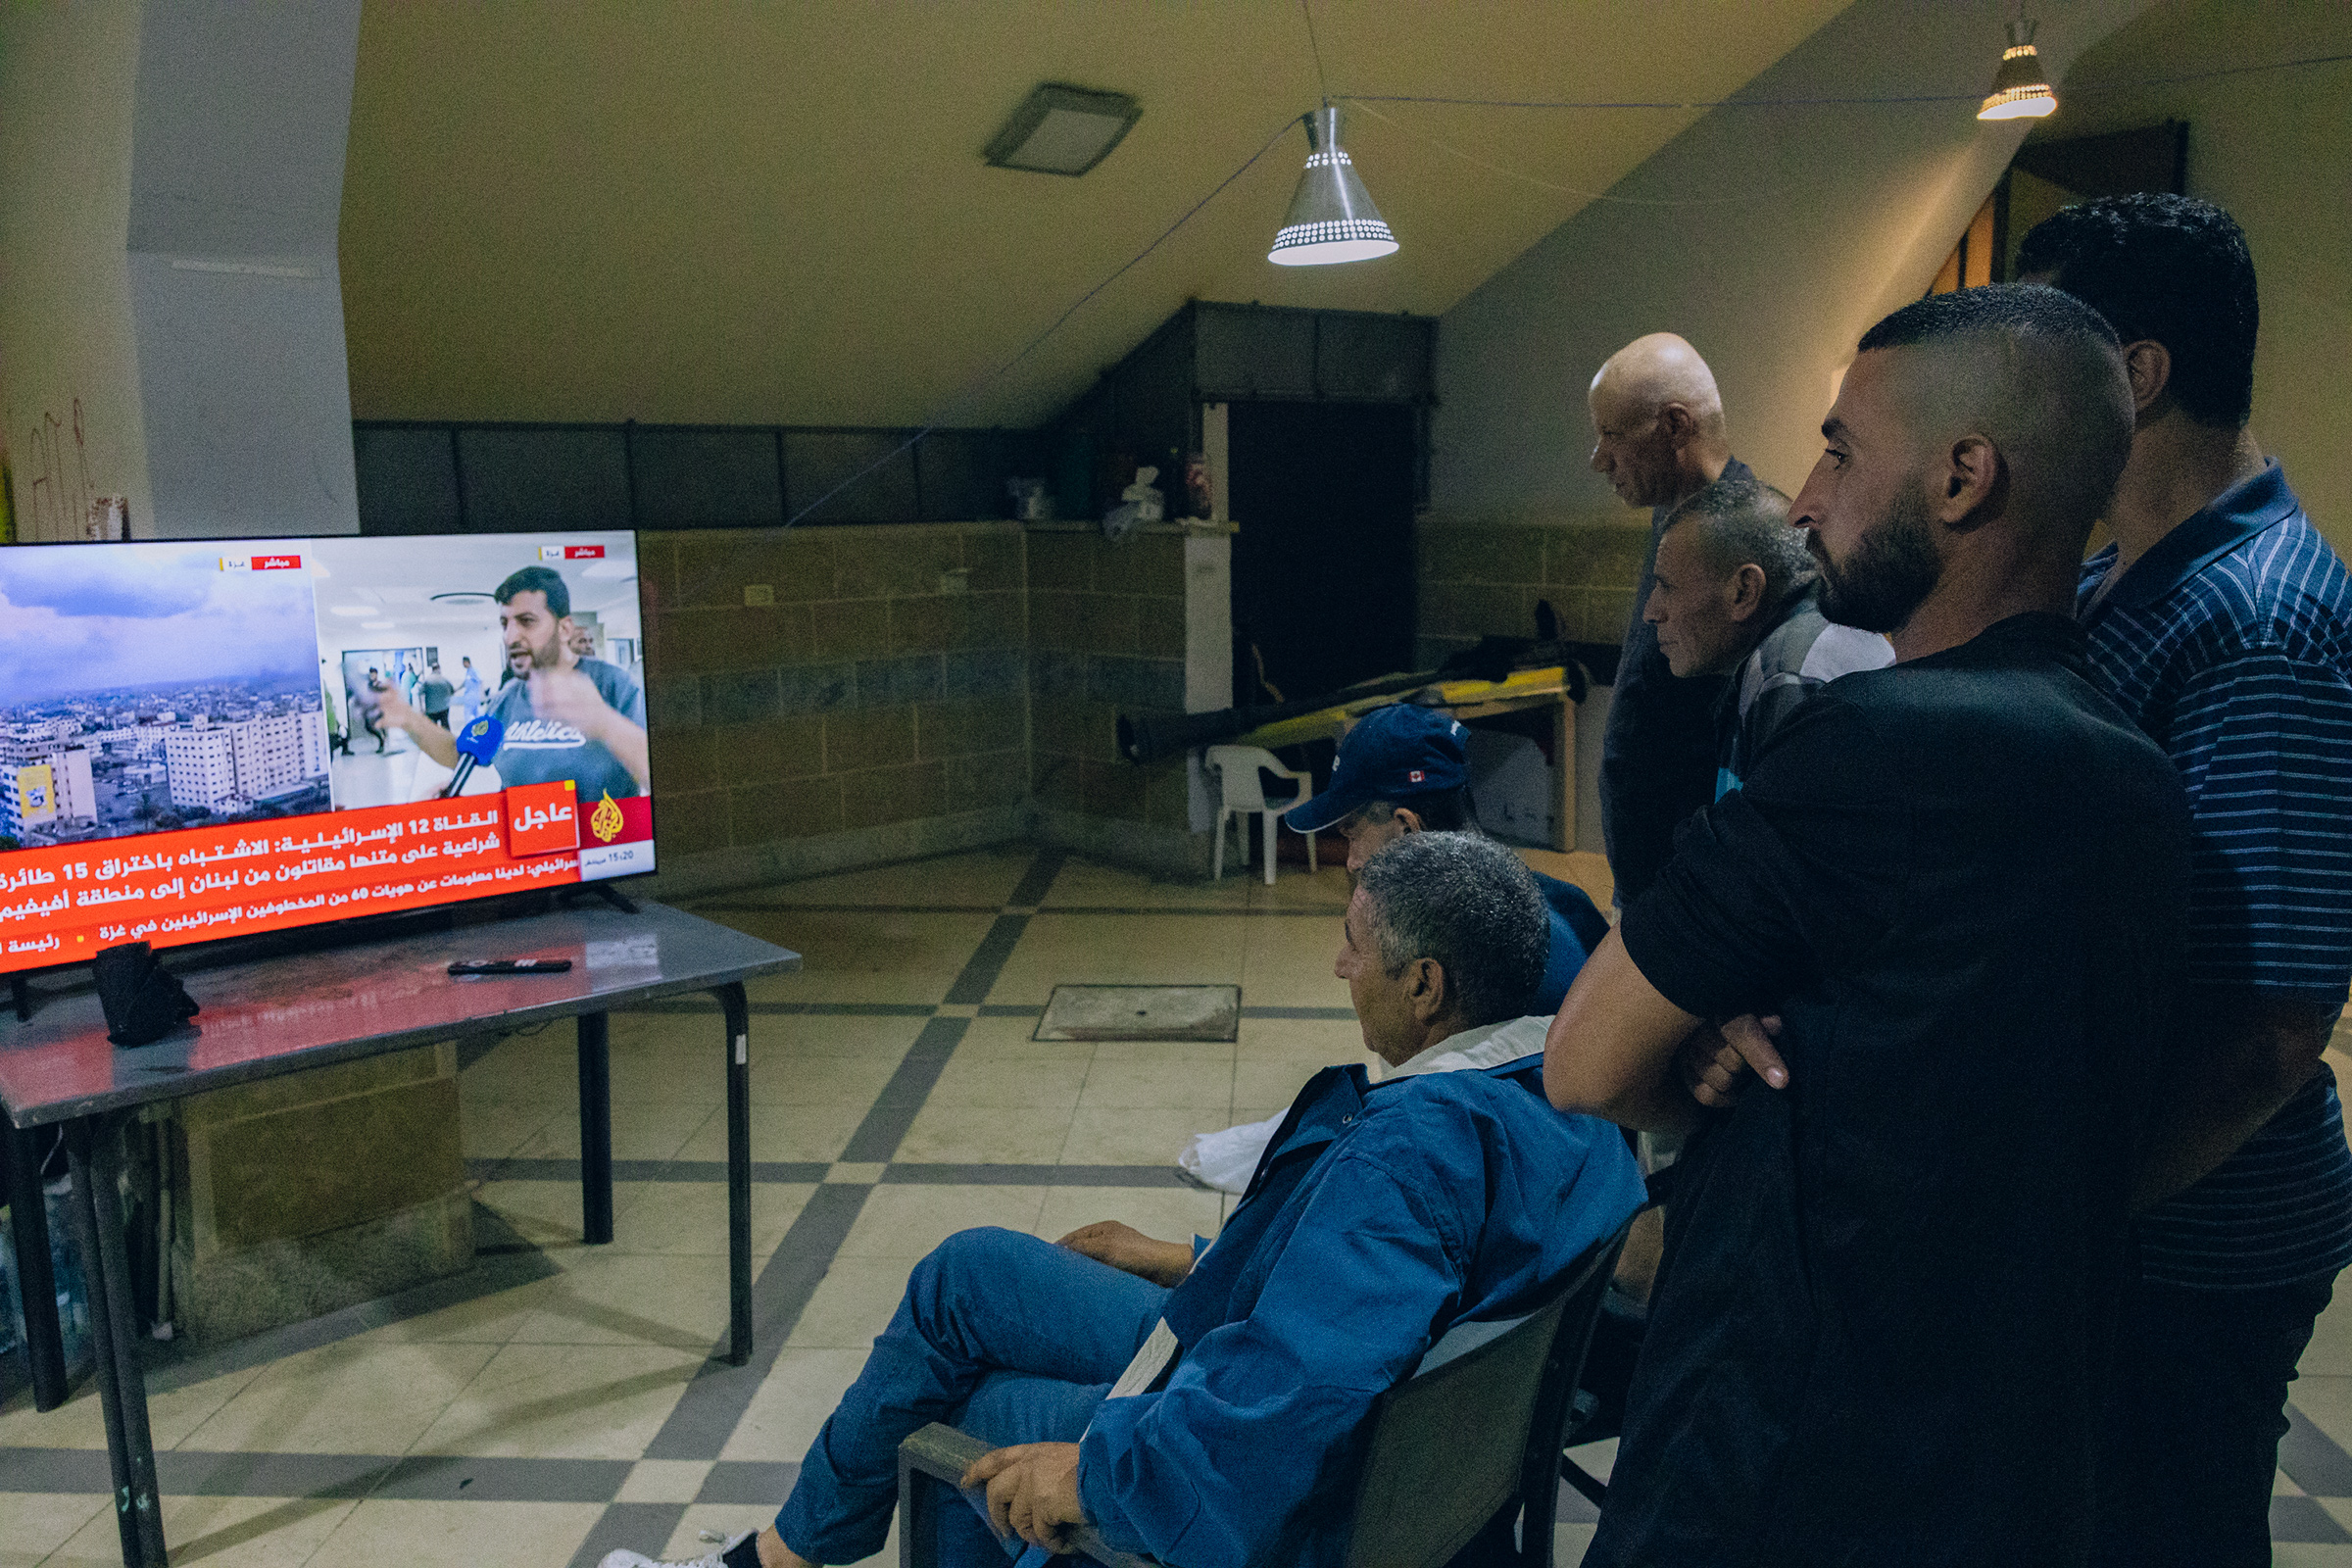 A group of Palestinian workers from Gaza at the Sarriyeh sports club in the West Bank city of Ramallah watch an Al Jazeera news broadcast from a hospital in Gaza, Oct. 12.